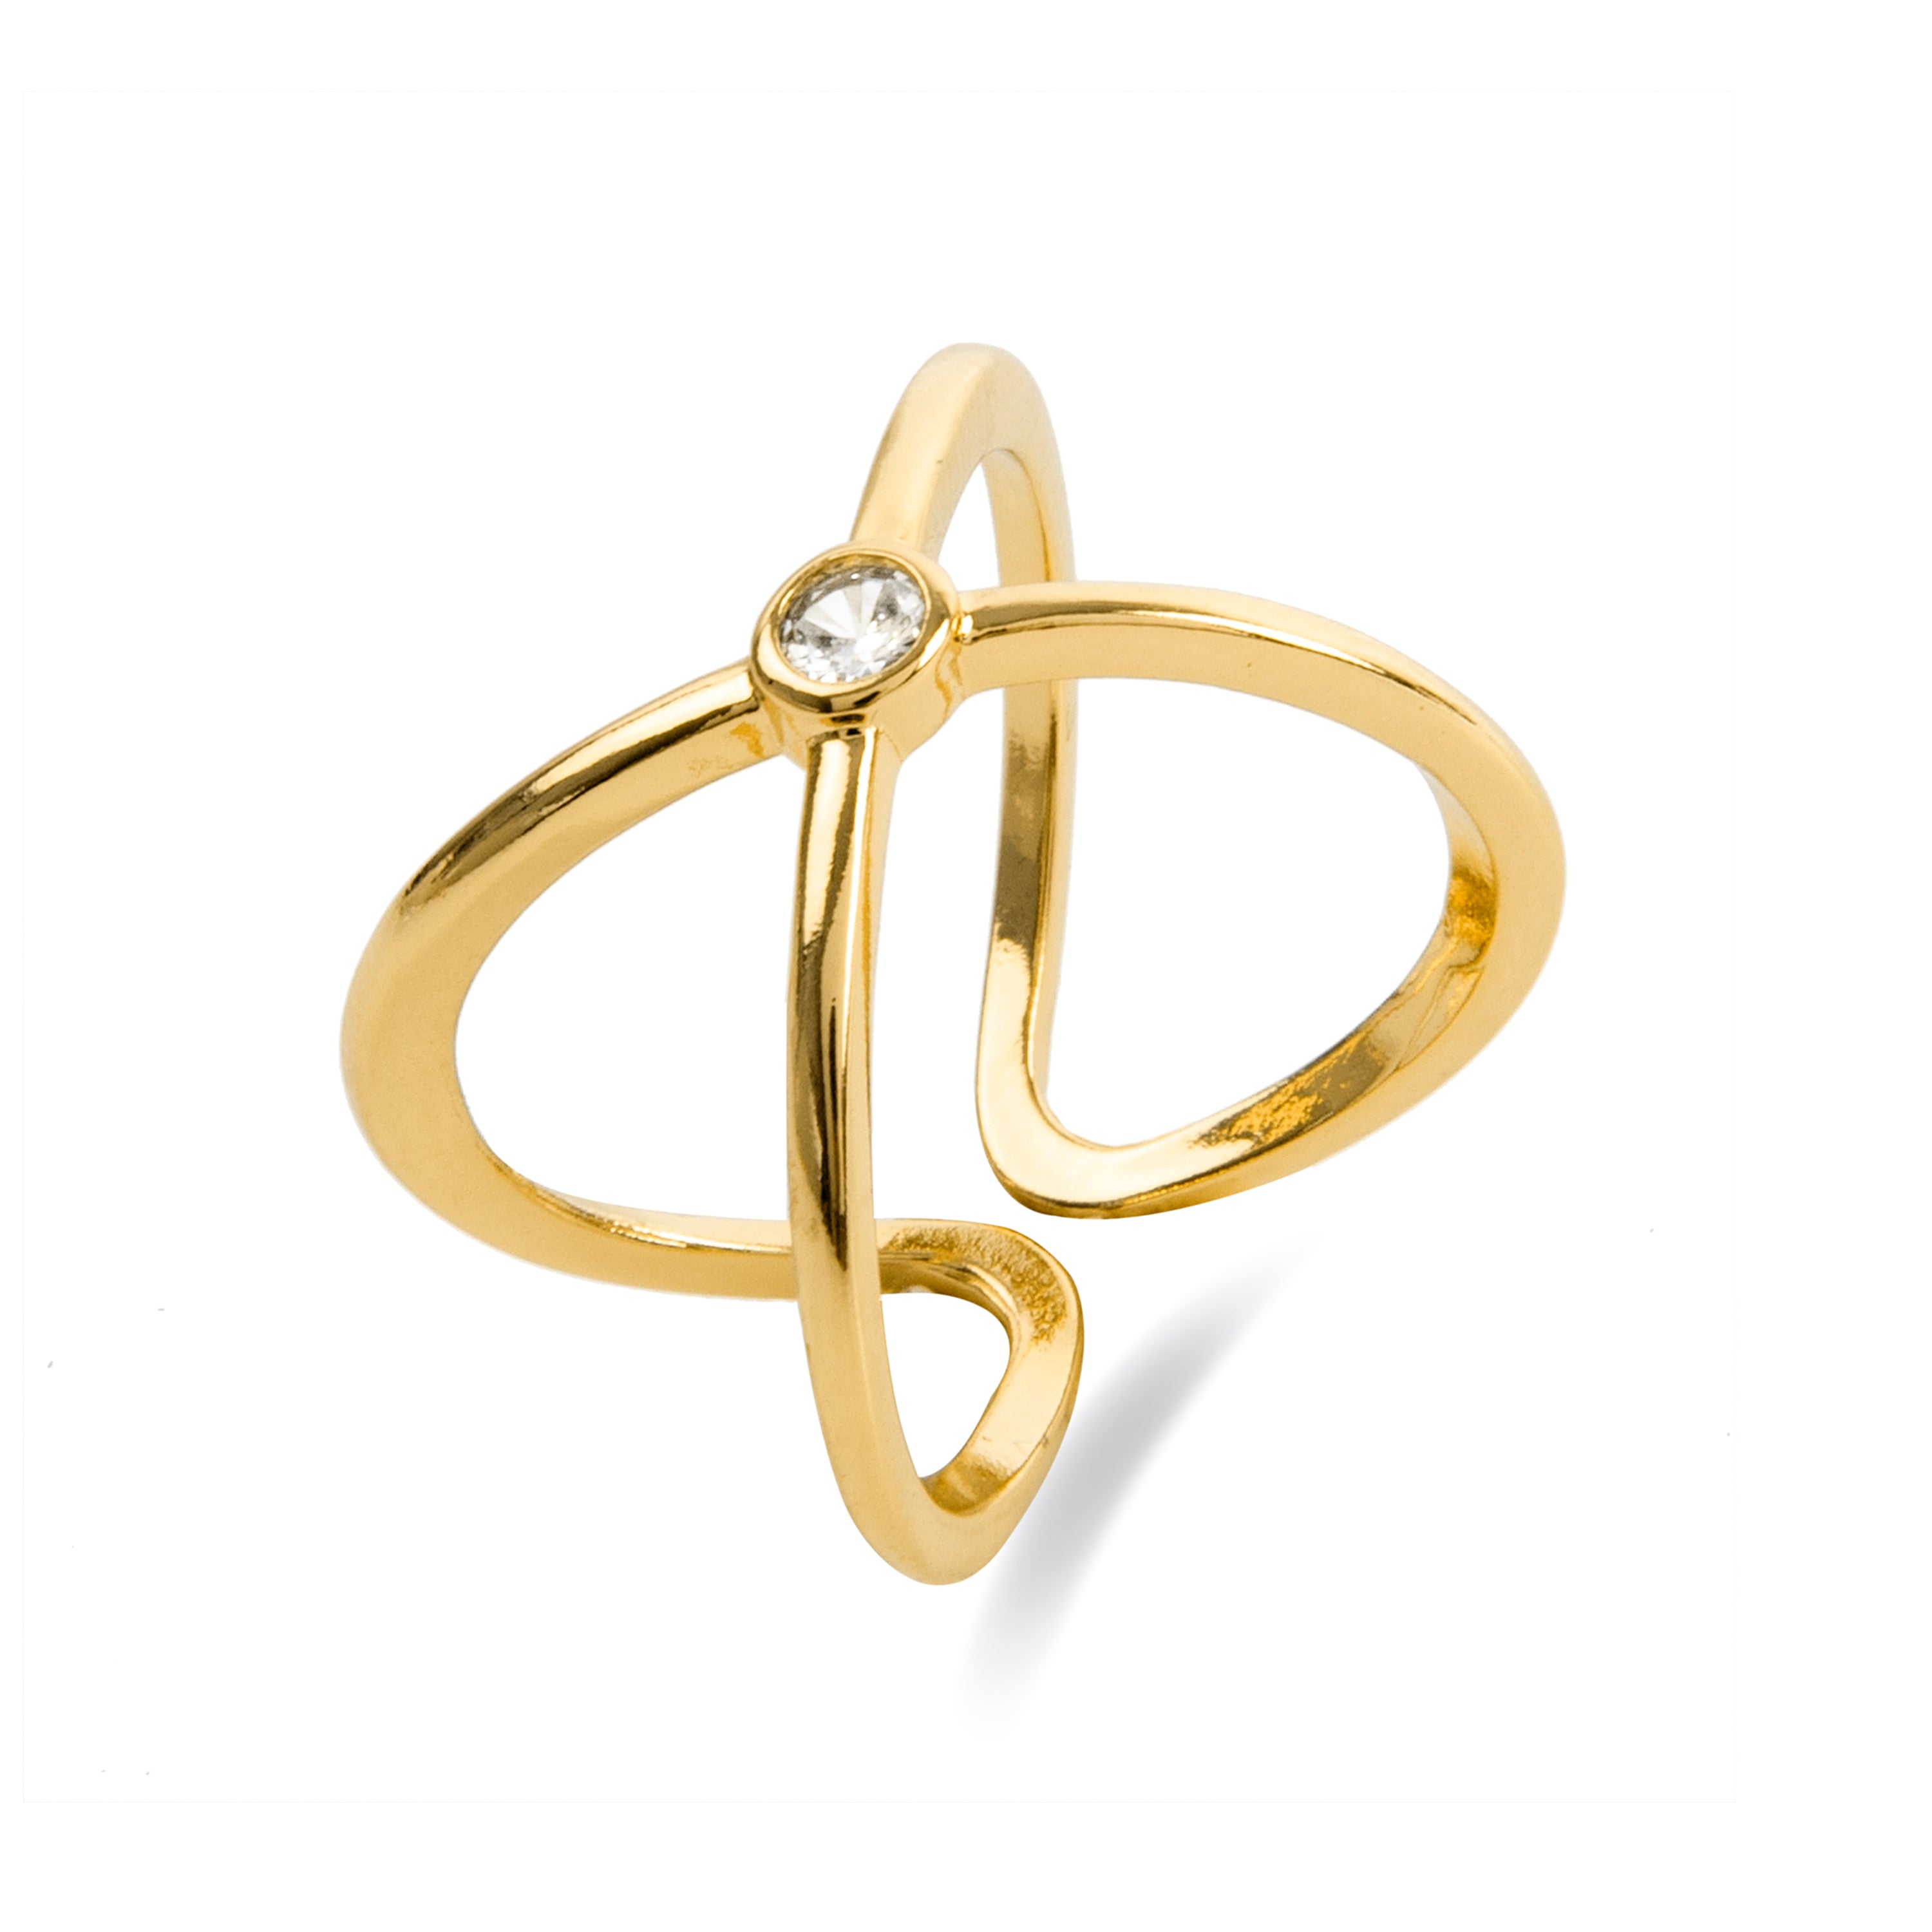 Rai ring finished in 18k yellow gold